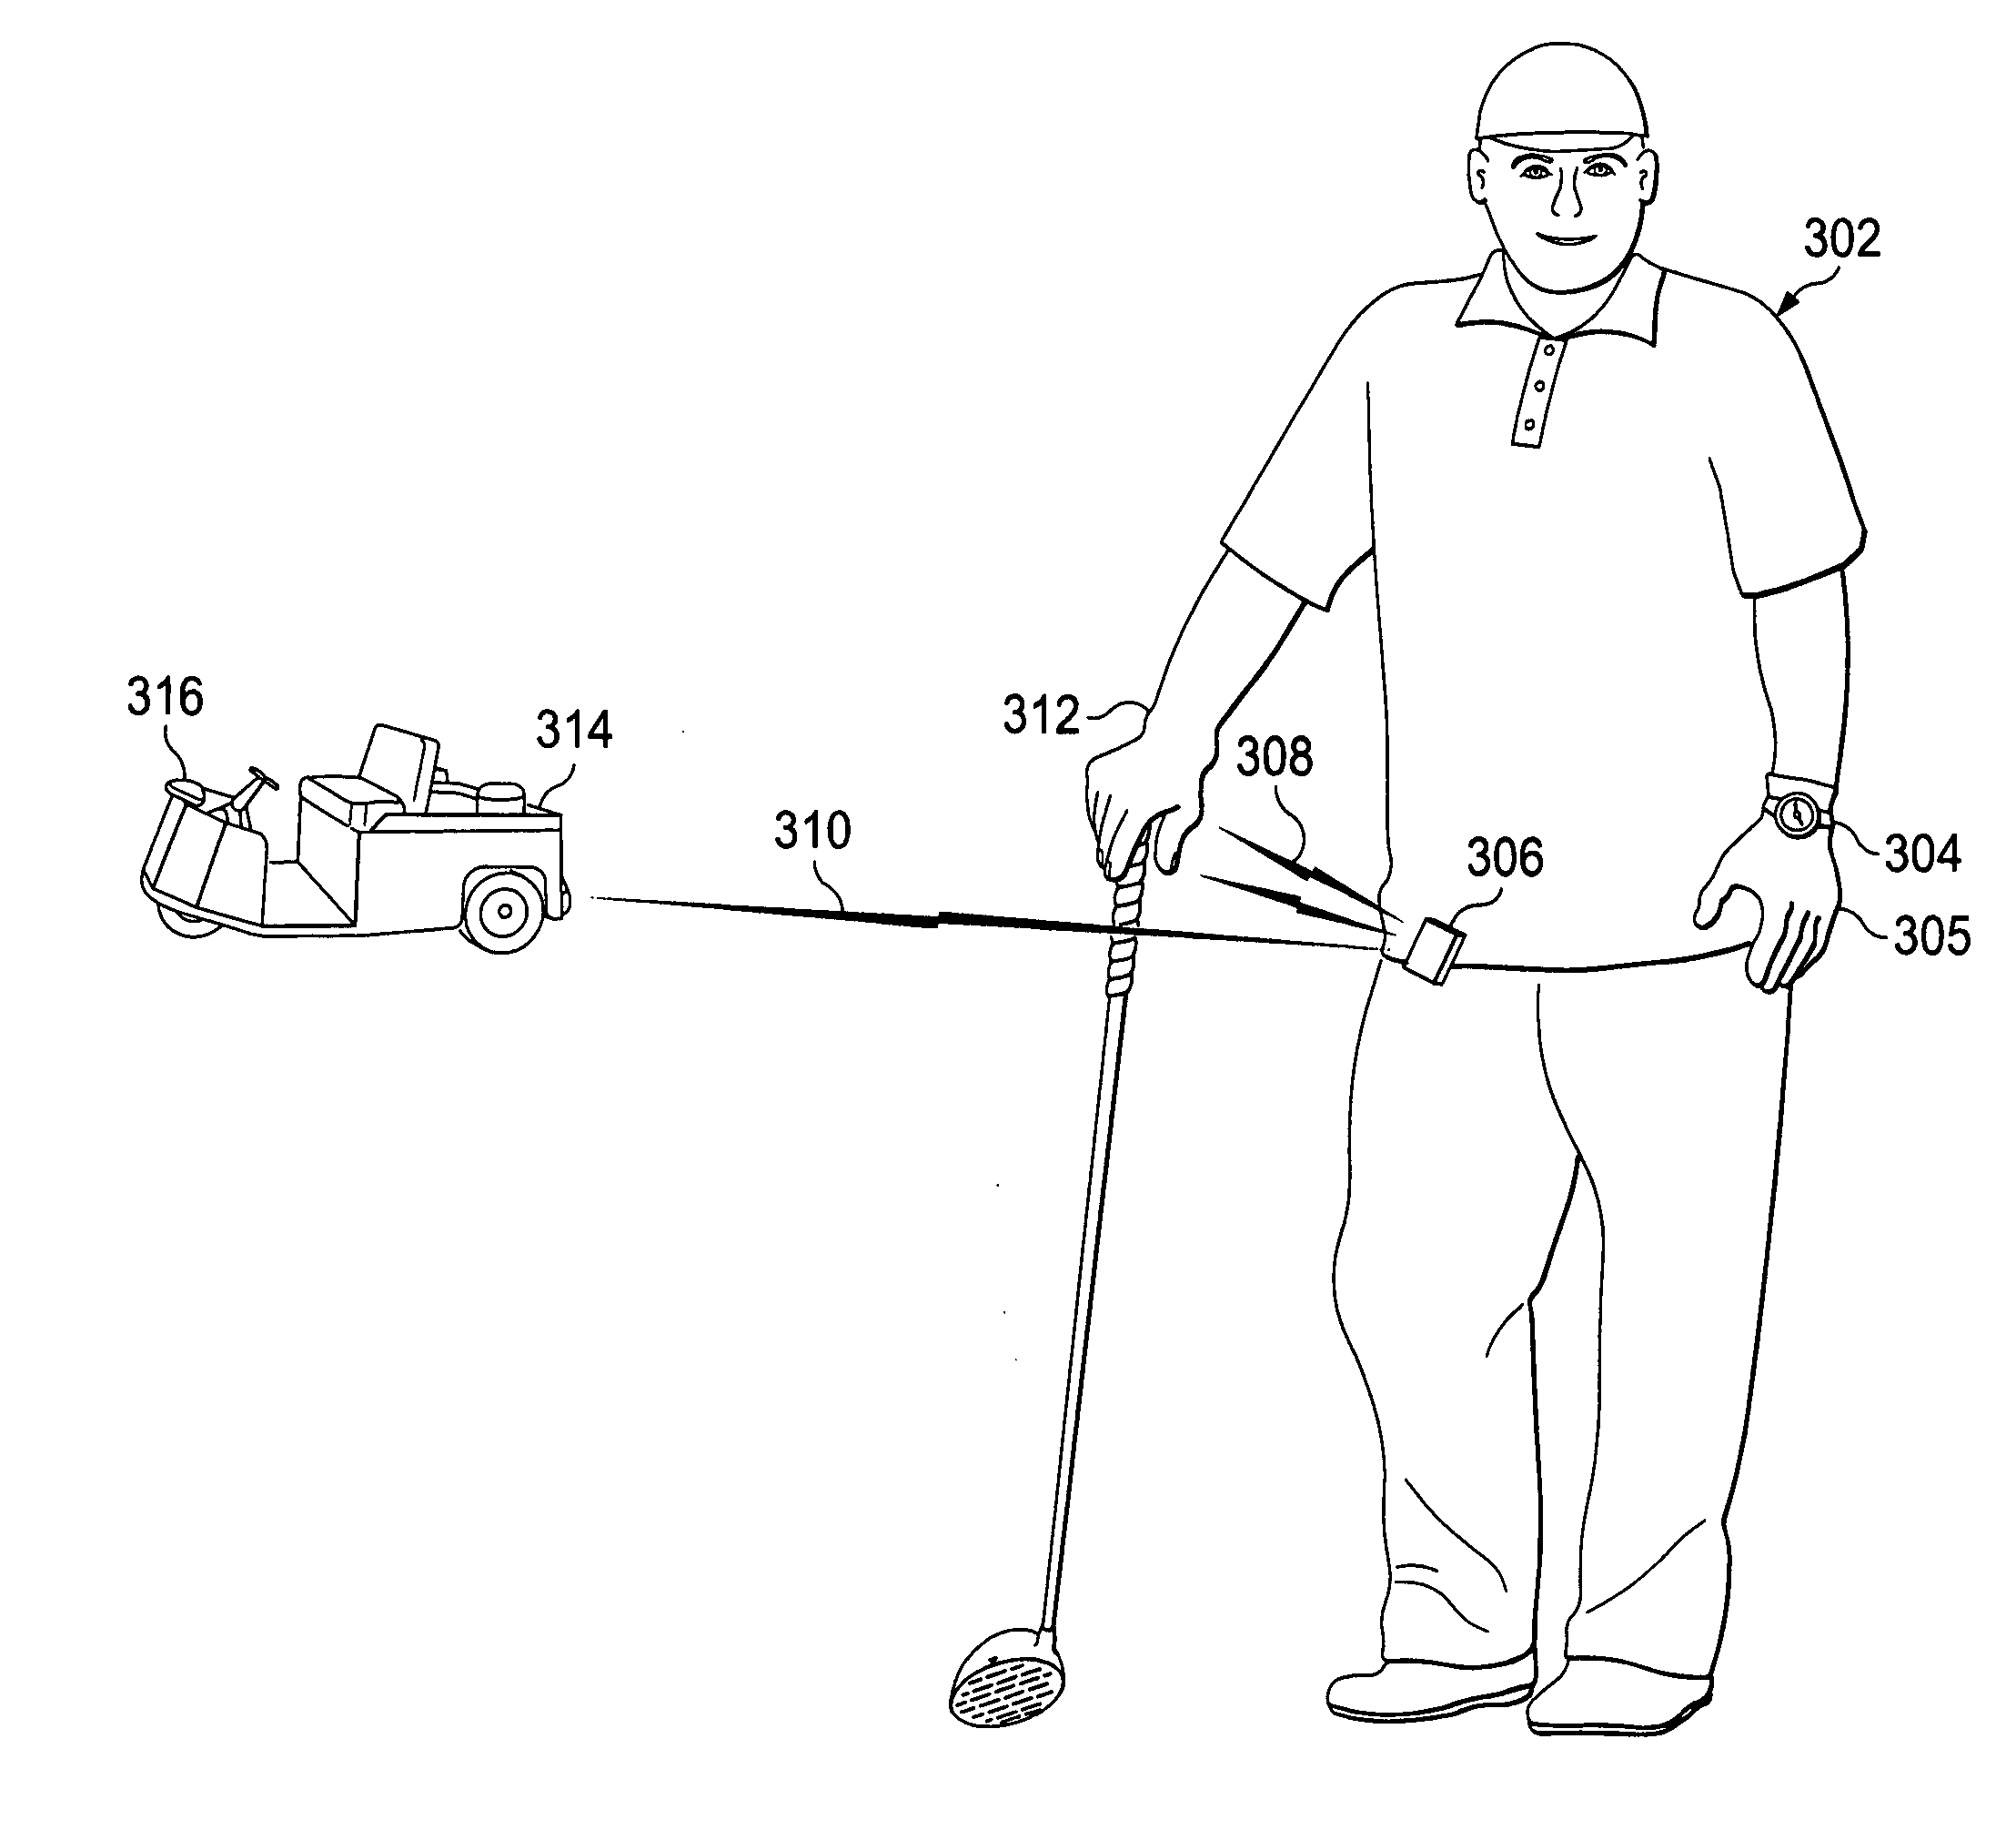 Golf club and accessory system utilizable during actual game play to obtain, anaysis, and display information related to a player's swing and game performance